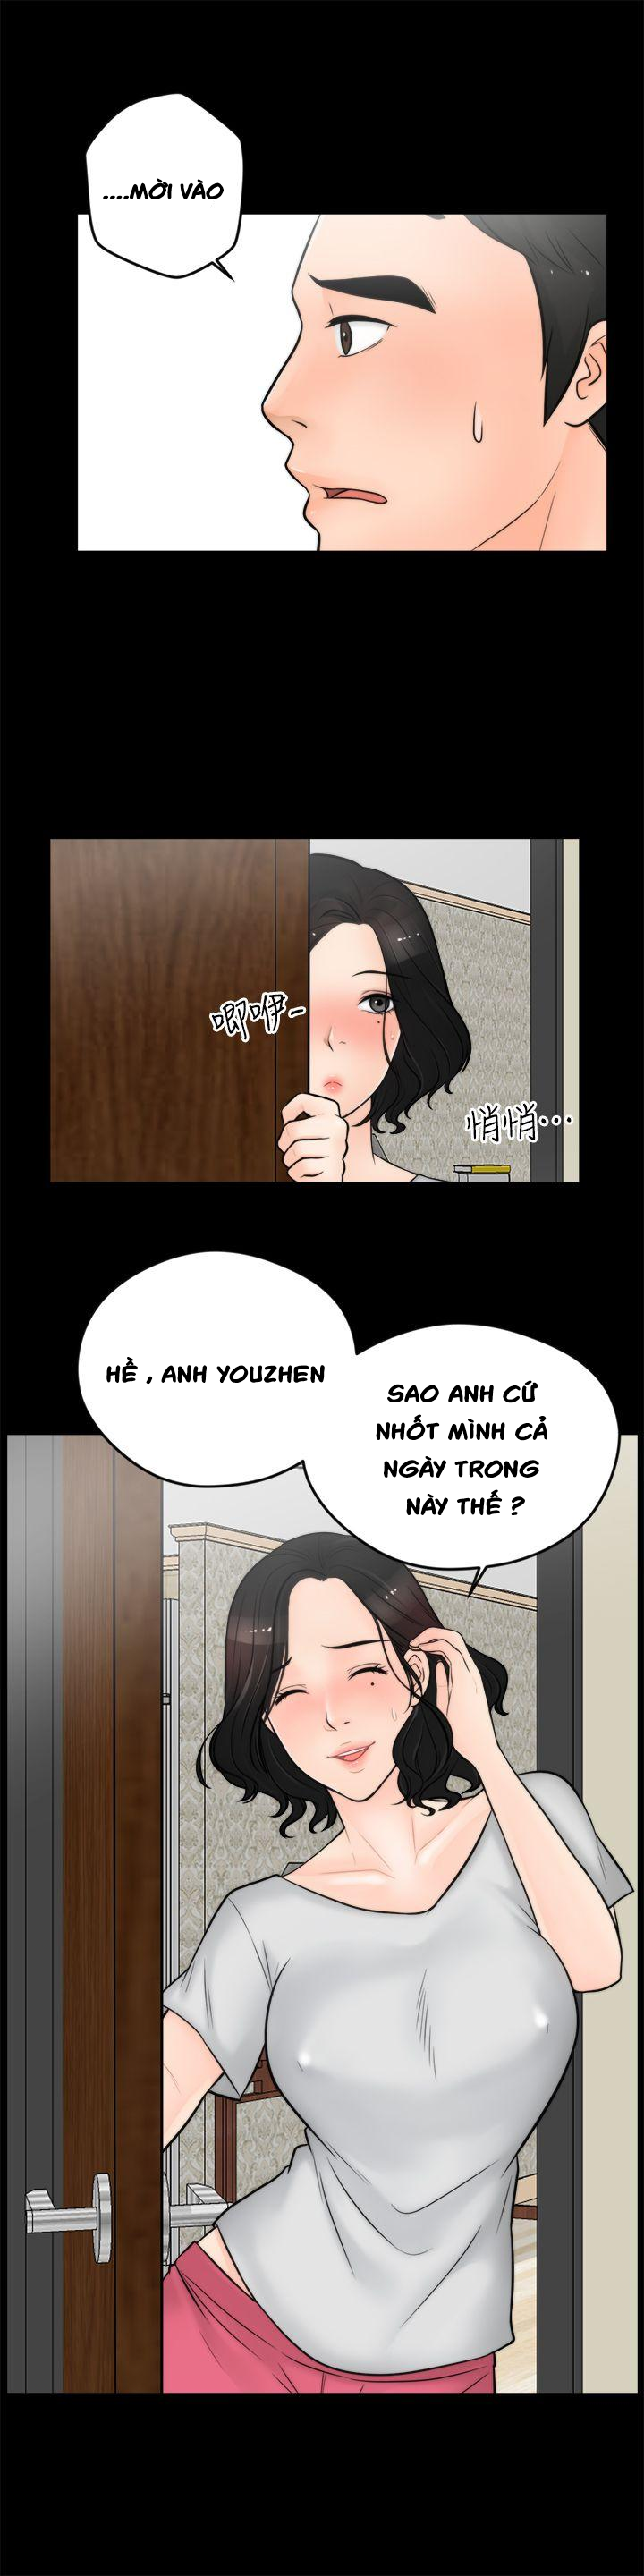 Chapter 004 : Chapter 04 ảnh 7